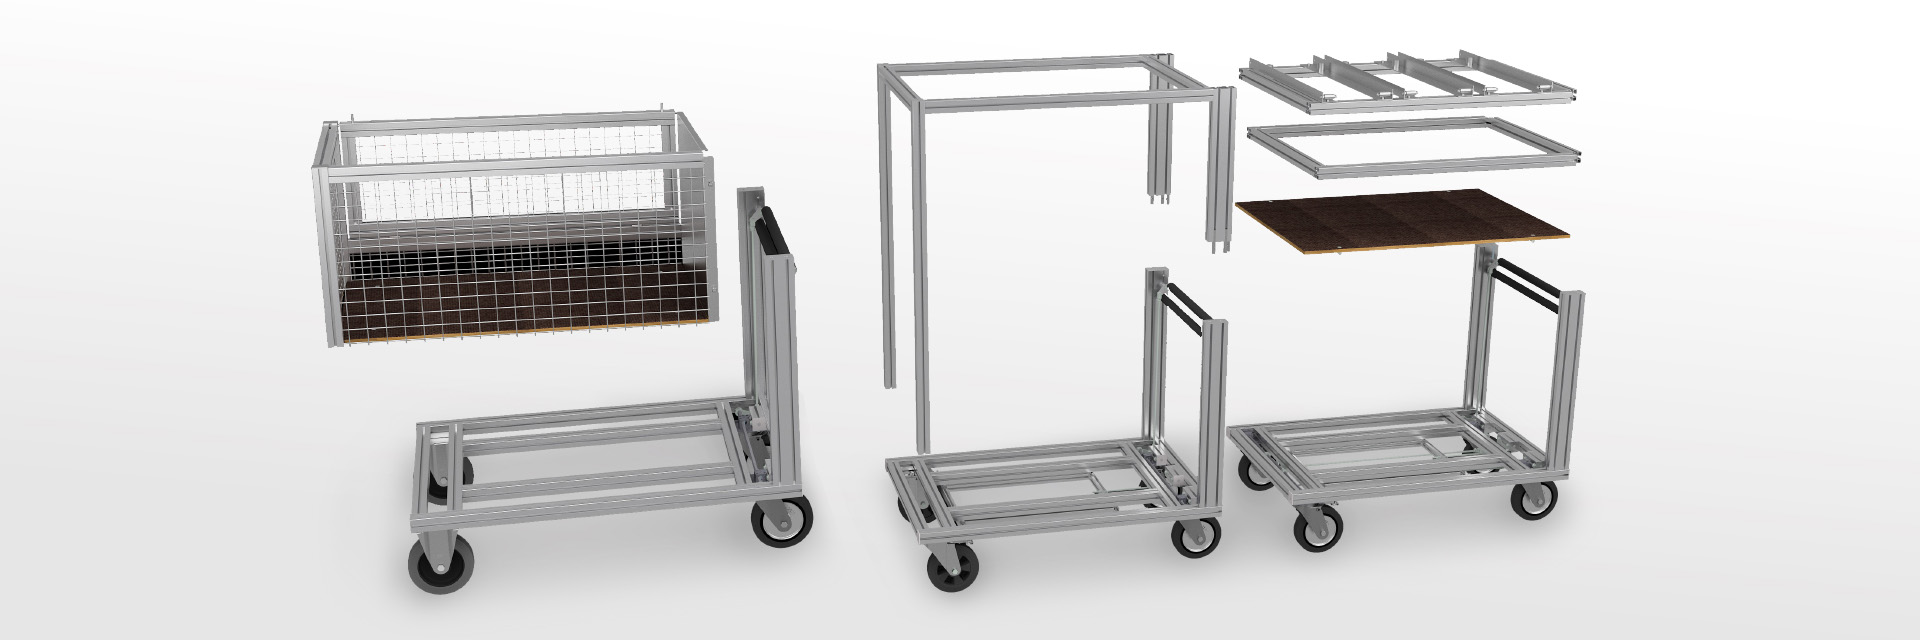 Explosion mobile container racks